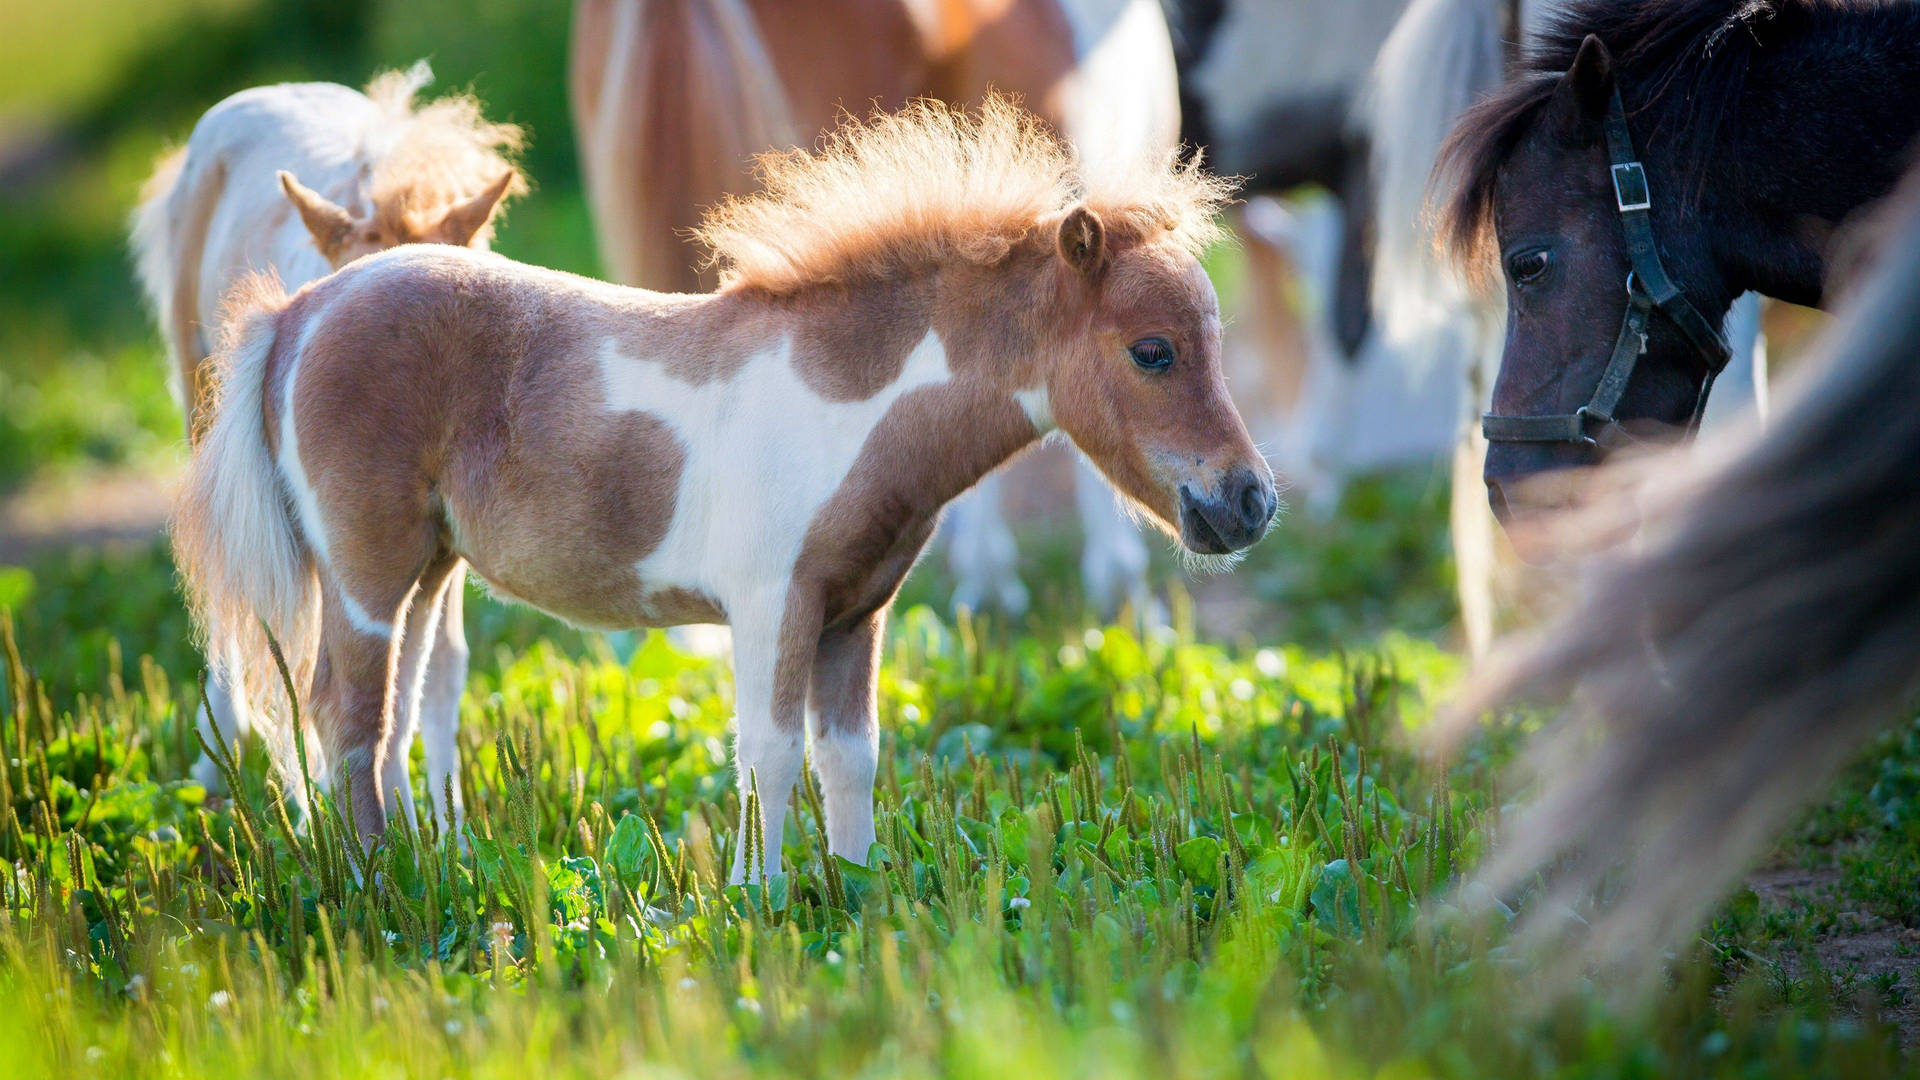 Cute Horse With Little Pony